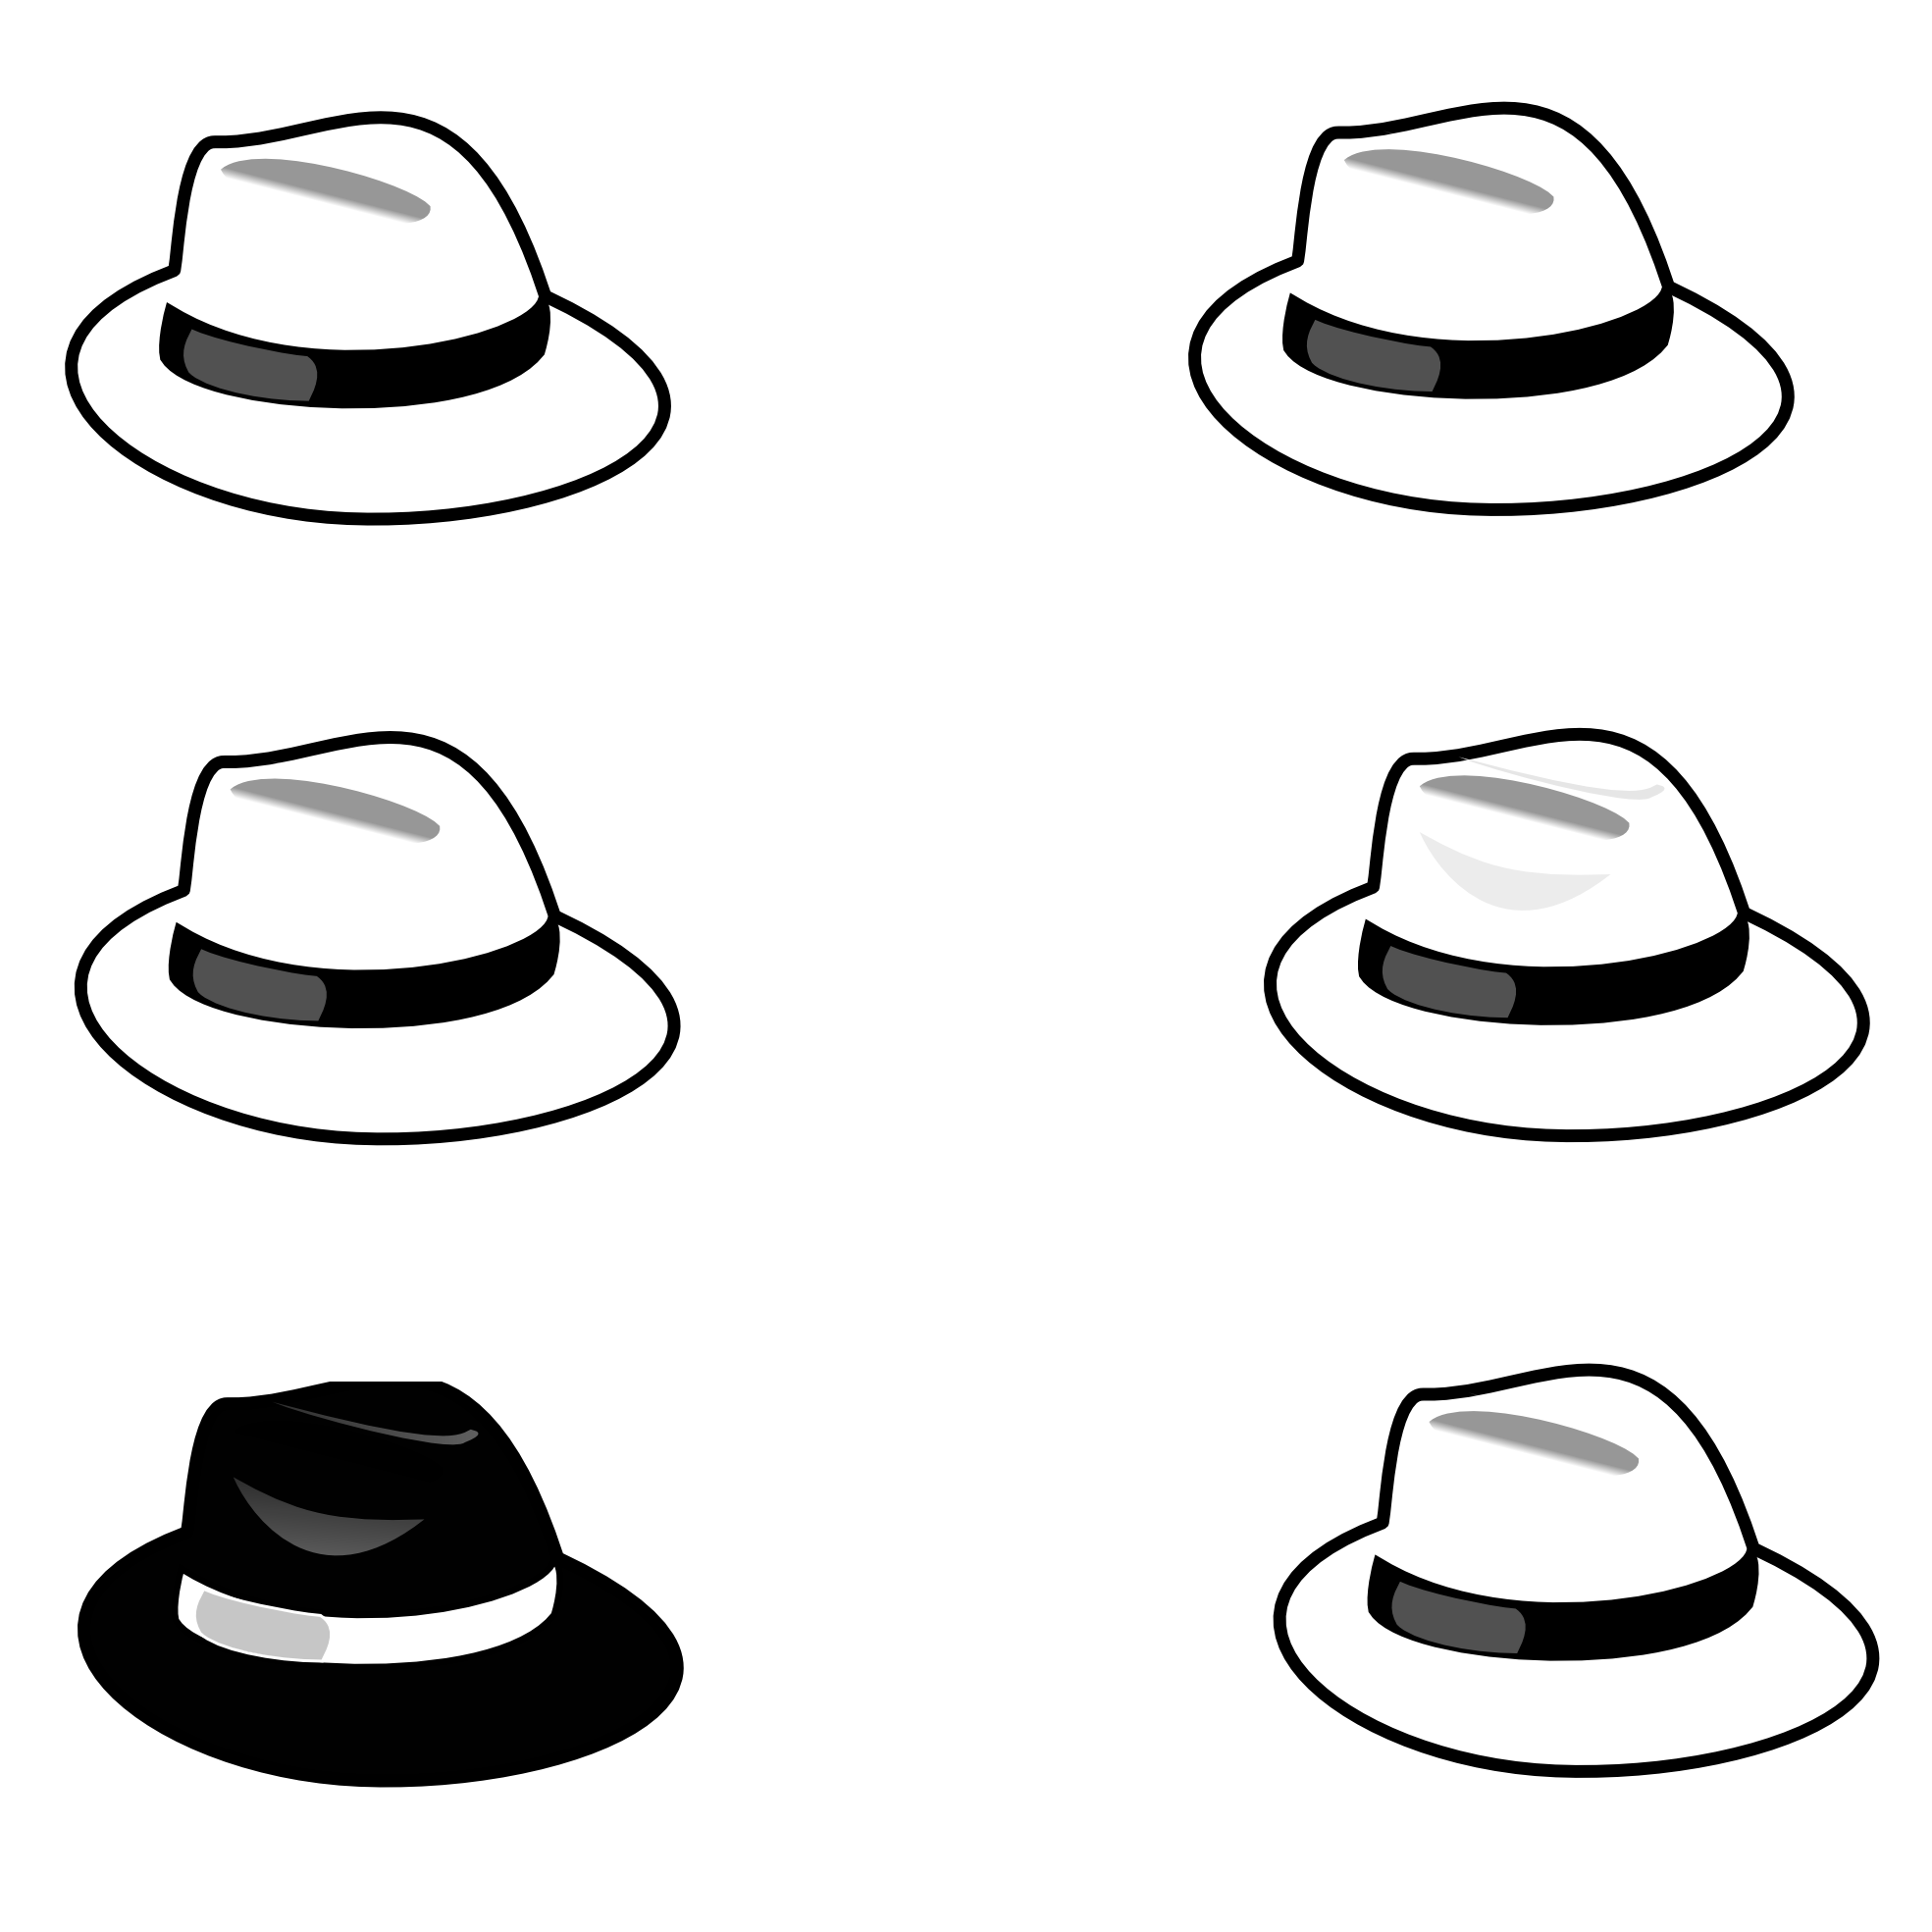 Pirate Hat Clipart Black And White   Clipart Panda   Free Clipart